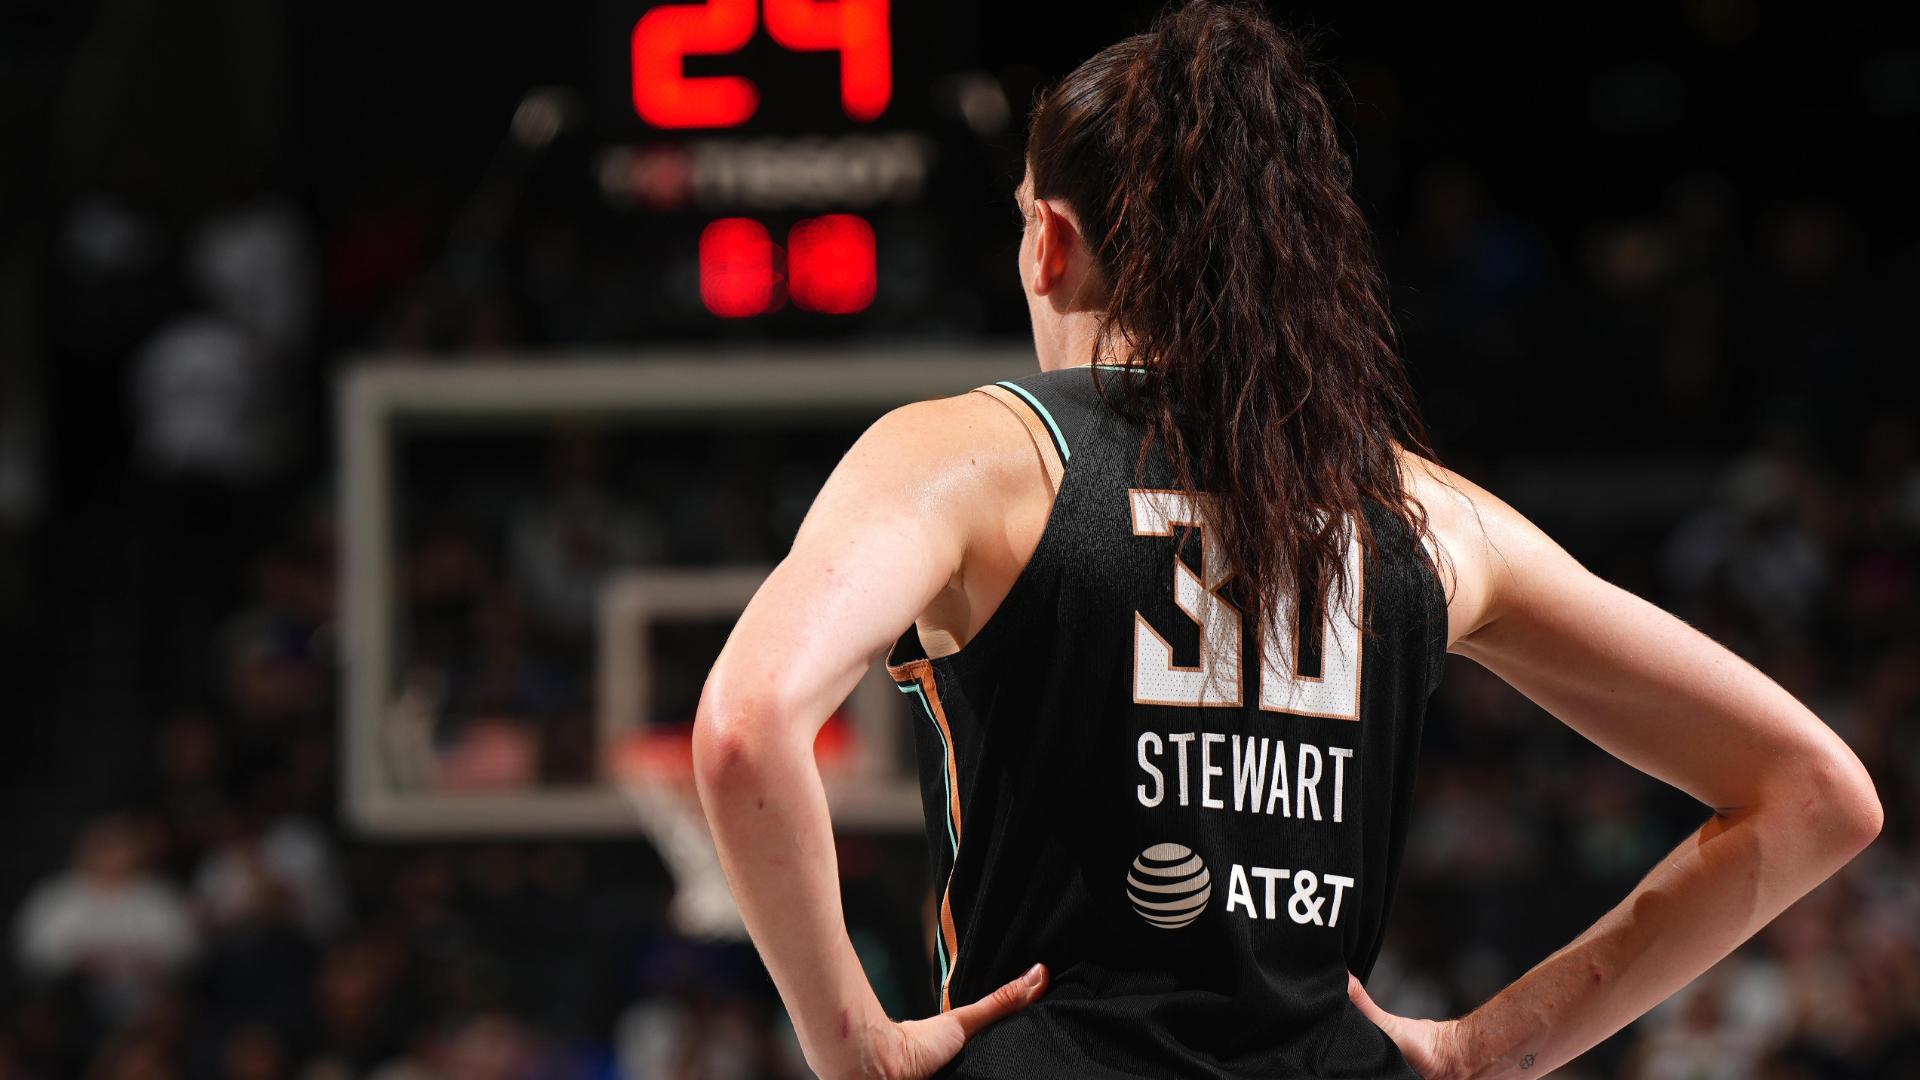 Breanna Stewart becomes fastest to score 5,000 points in WNBA history